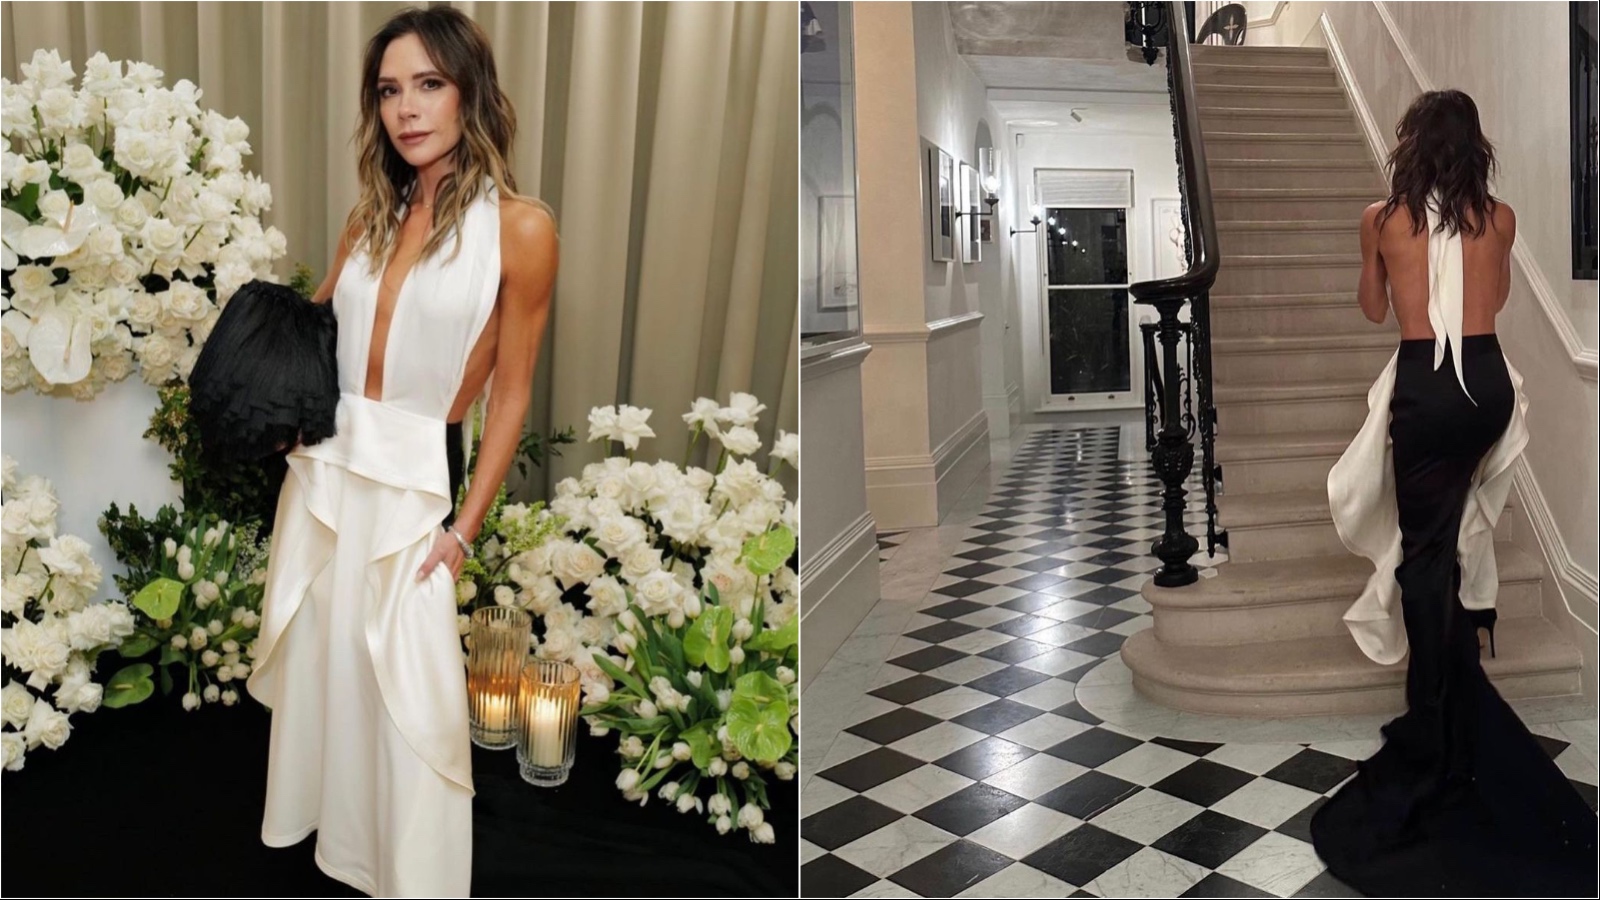 Style Crush of the Week: Victoria Beckham